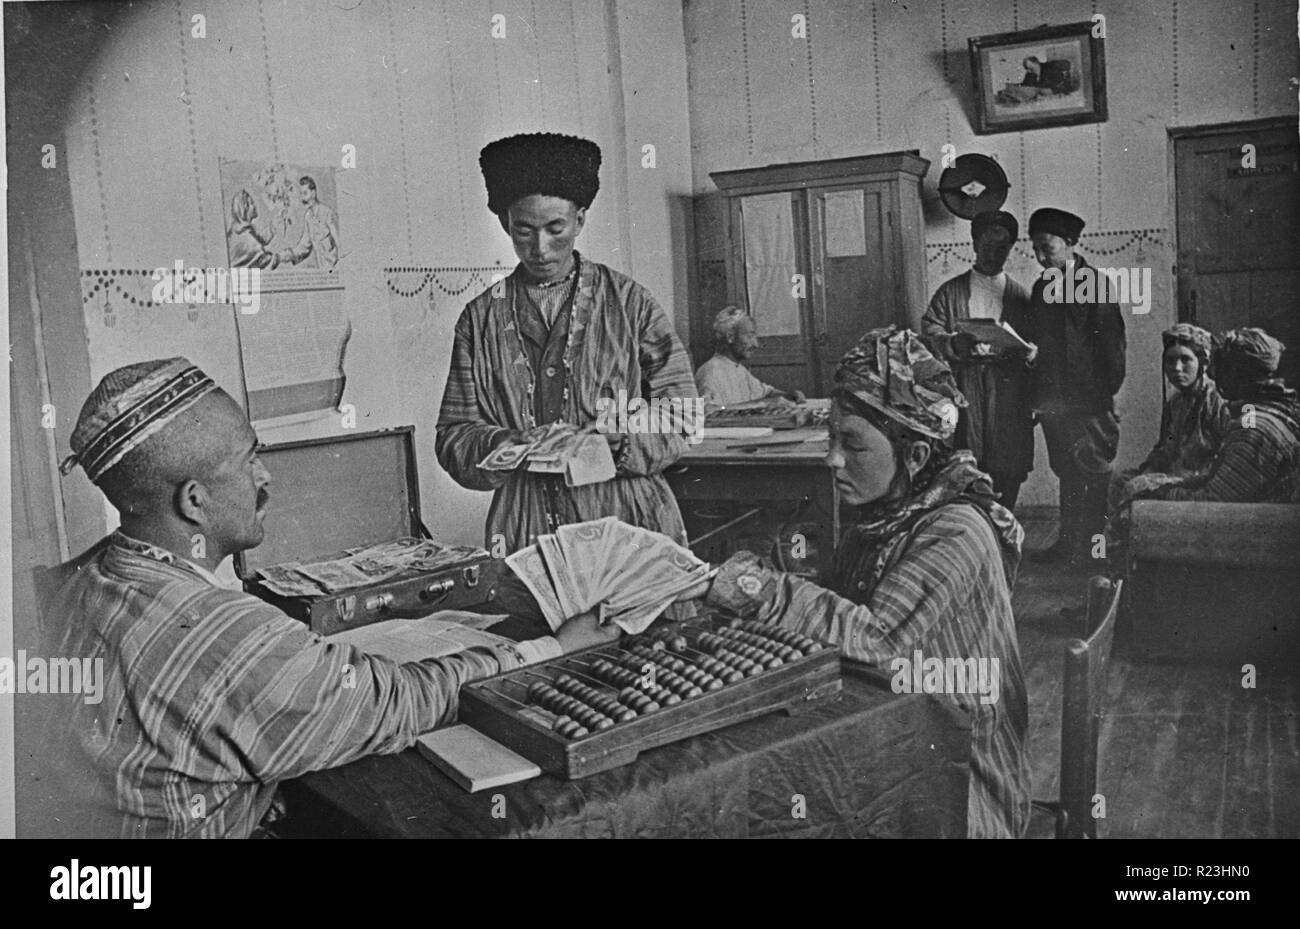 Turkmenian collective farmers receiving part of their yearly income from the profits of the farm in the farm administration office in the USSR (Union of Soviet Socialist Republics) Between 1930 and 1940 Stock Photo